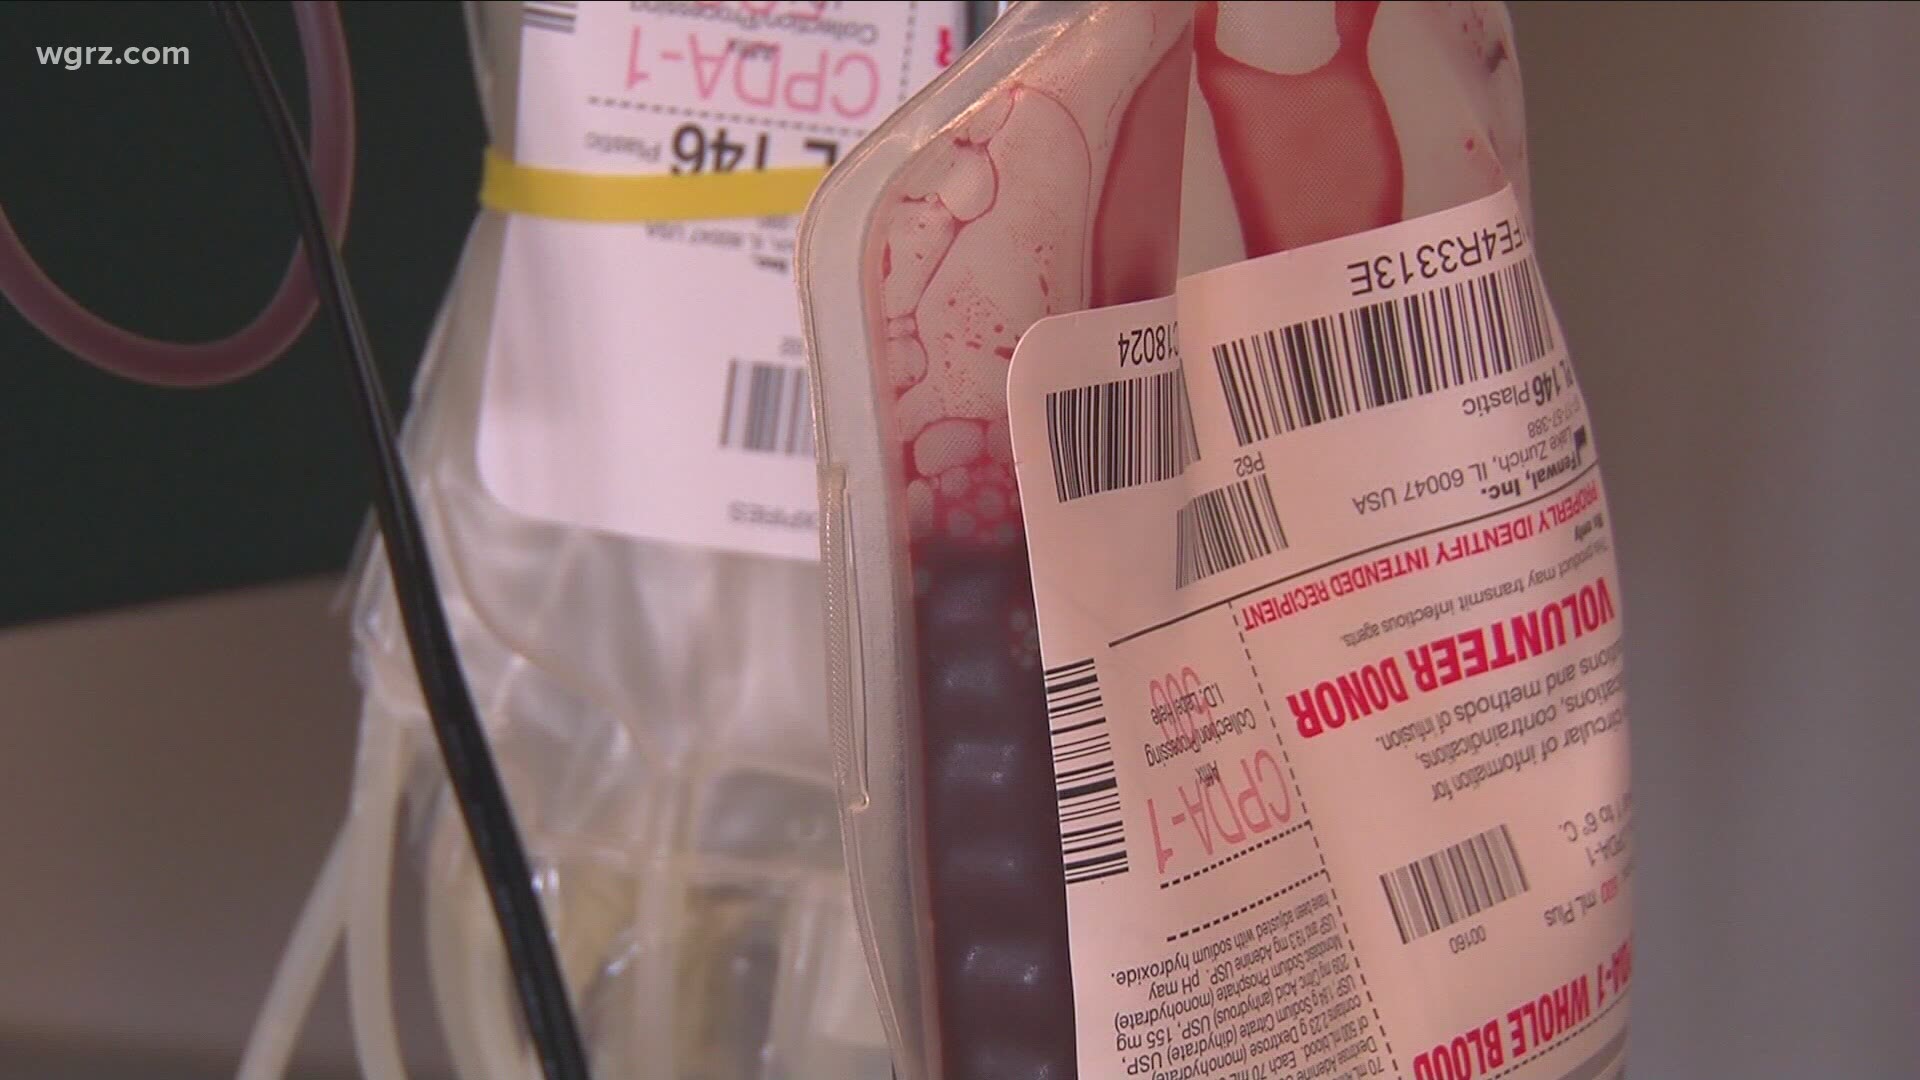 ConnectLife says it has less than a two-day supply of blood.